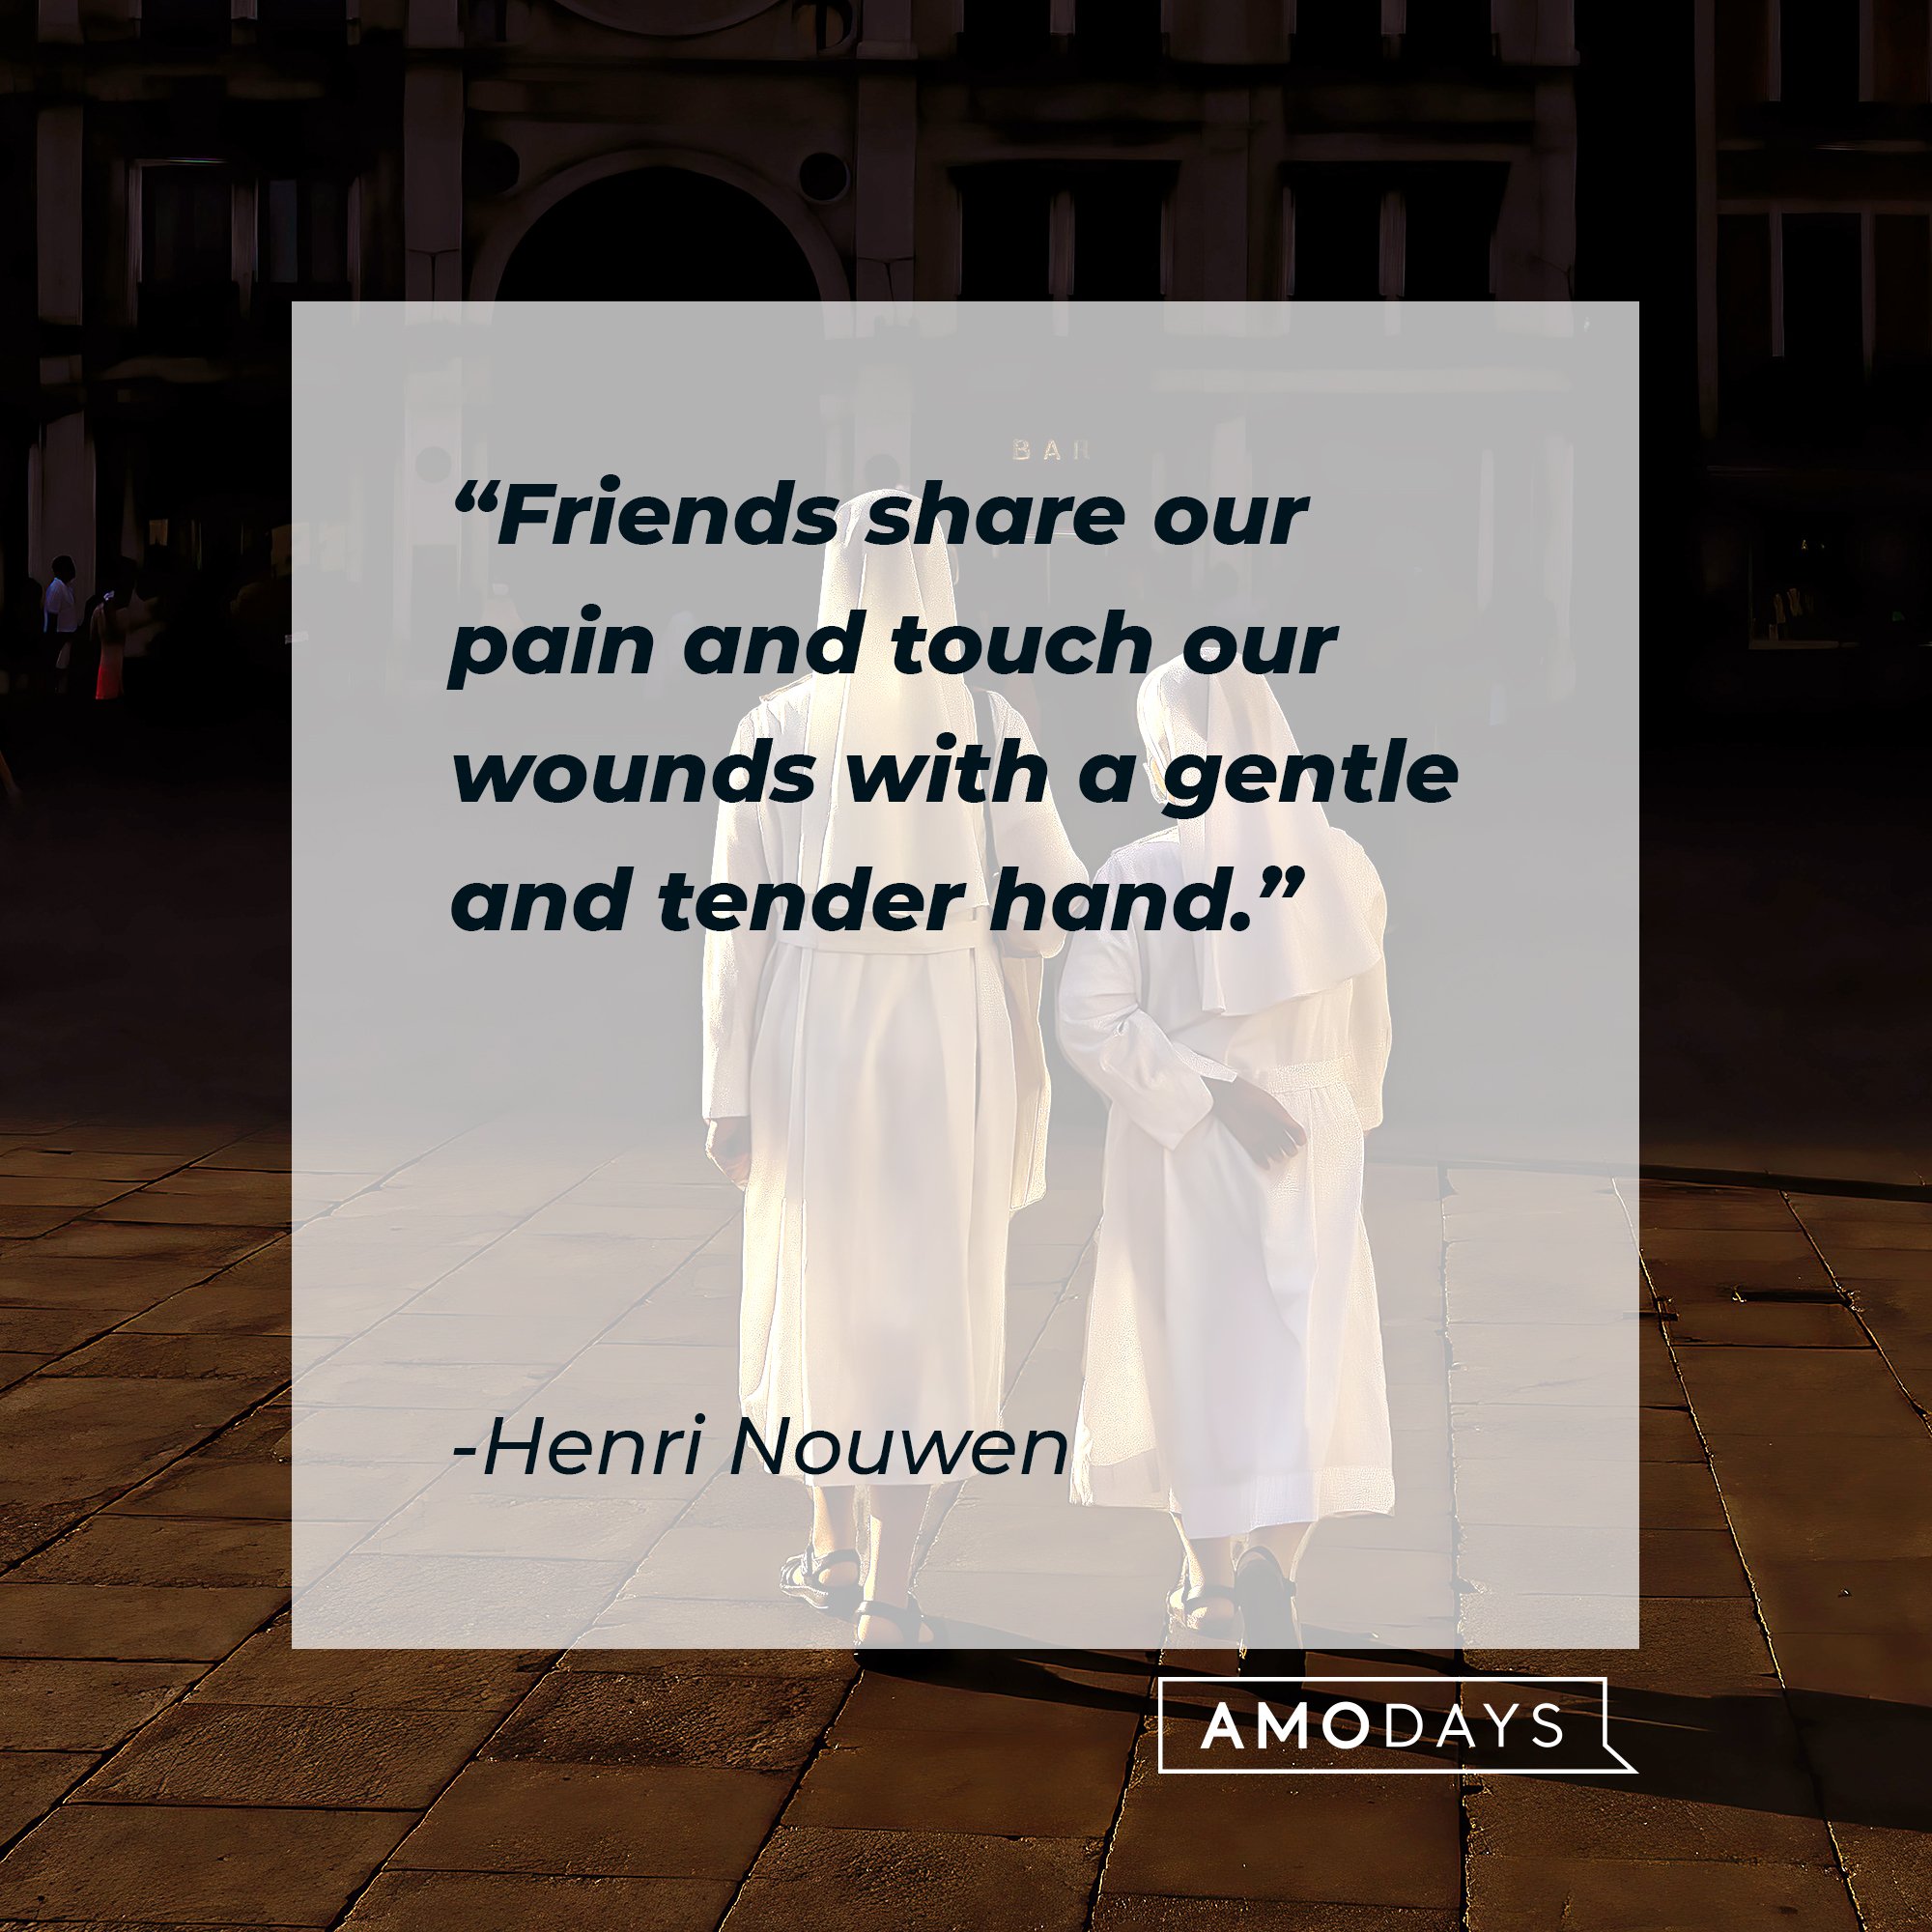 Henri Nouwen’s quote: "Friends share our pain and touch our wounds with a gentle and tender hand.” | Image: AmoDays